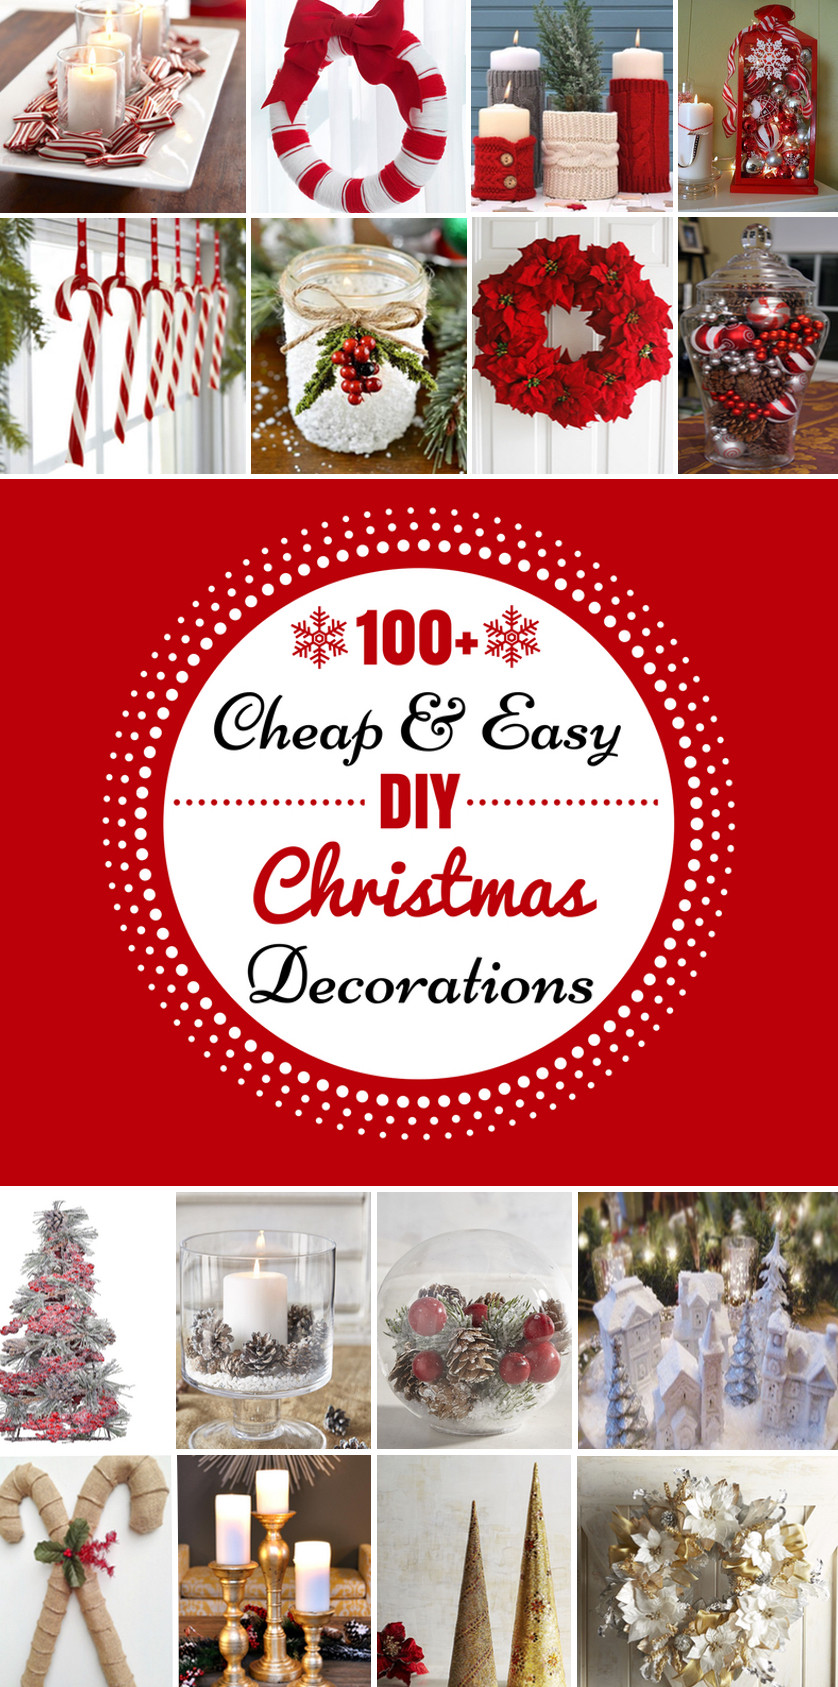 DIY Holiday Decorations Ideas
 100 Cheap & Easy DIY Christmas Decorations Prudent Penny